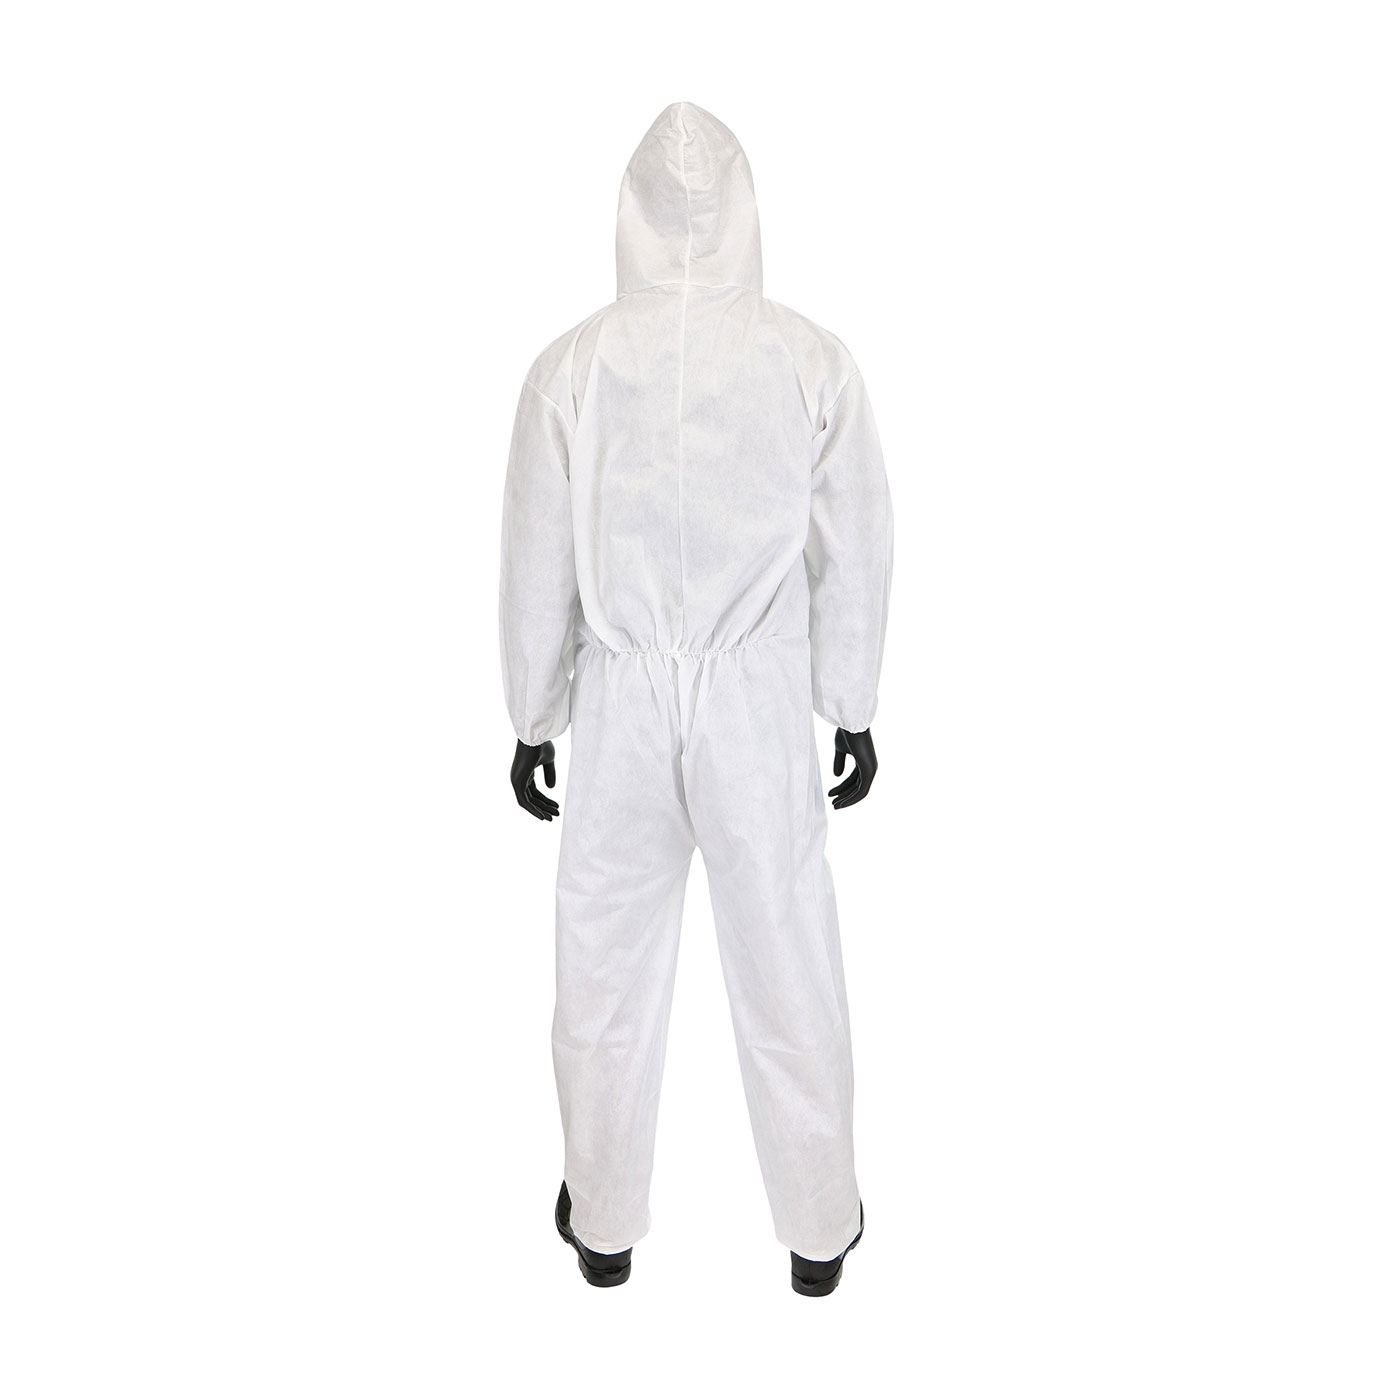 C3806 PIP® Posi-Wear® M3 Elastic Ankles and Wrist Hooded Coveralls